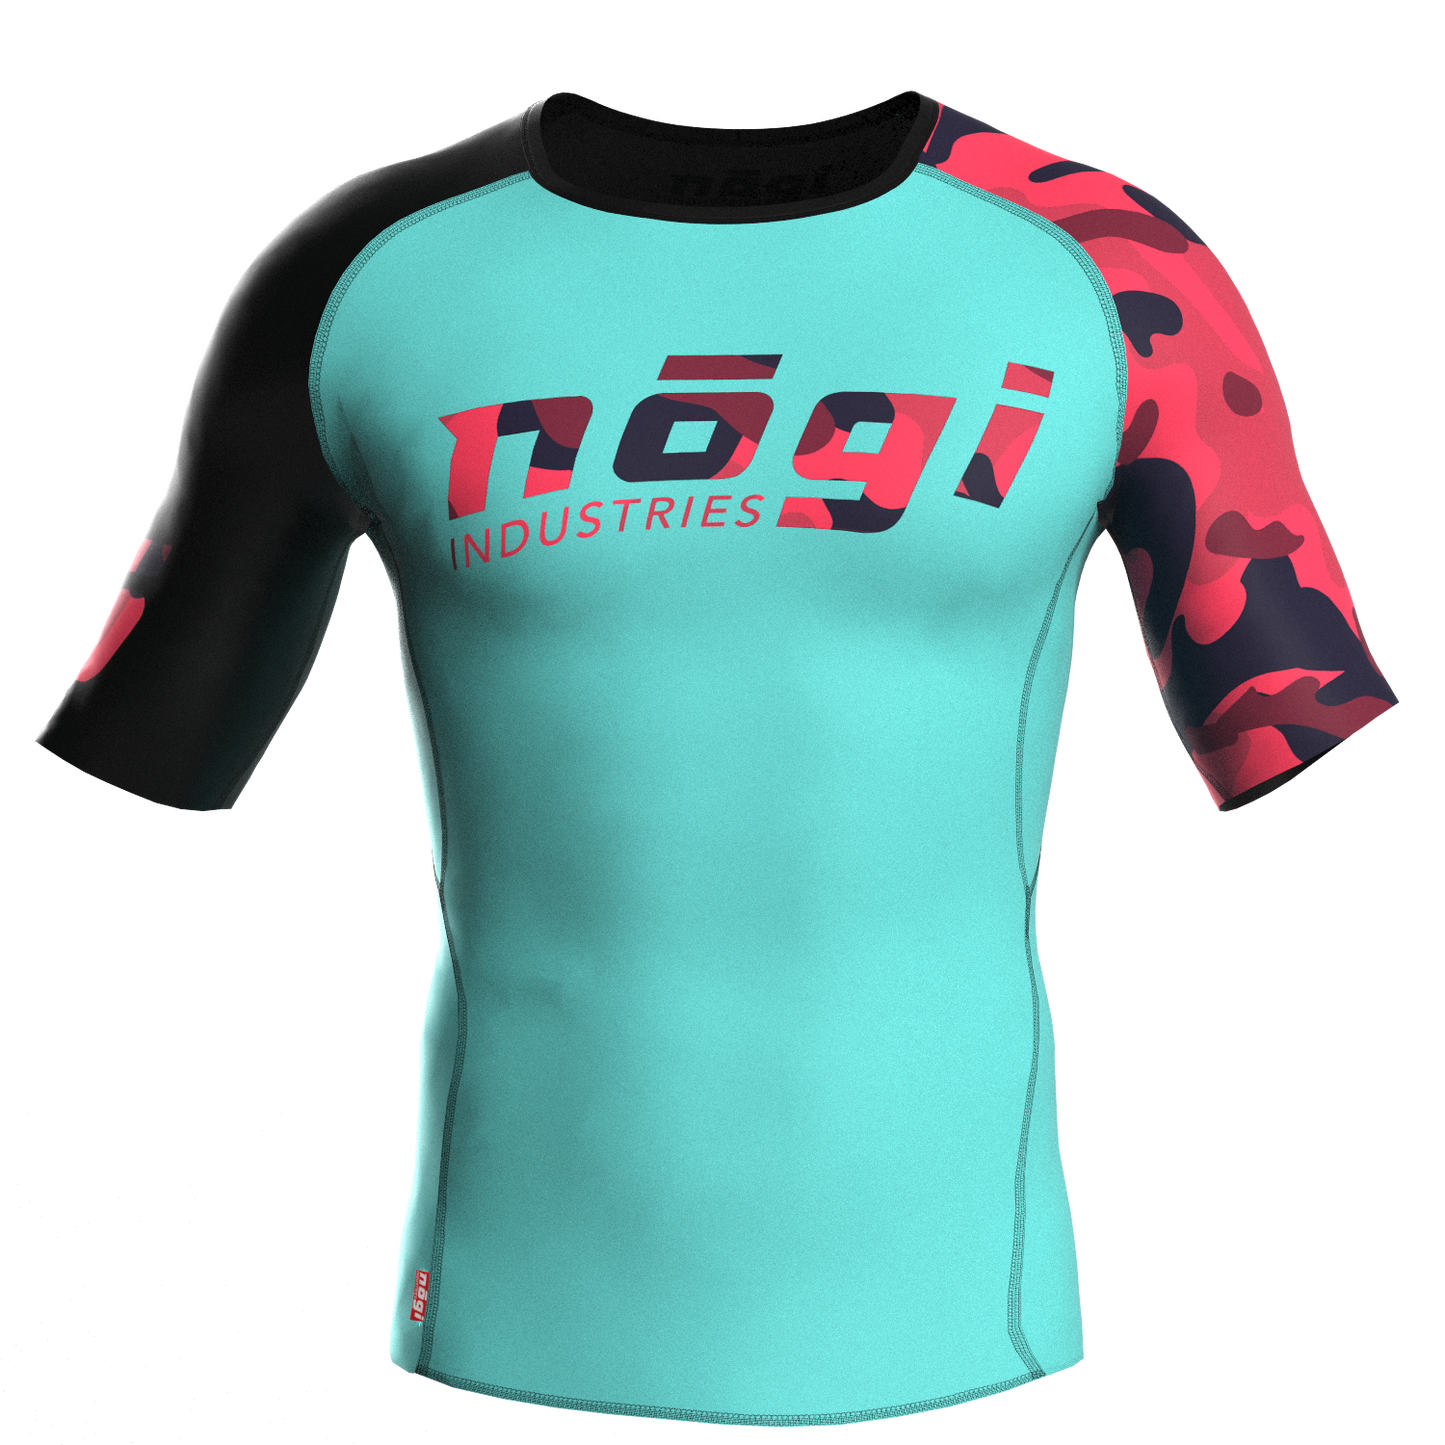 Recall Camo Short Sleeve Rash guard Teal with Red Camo Front